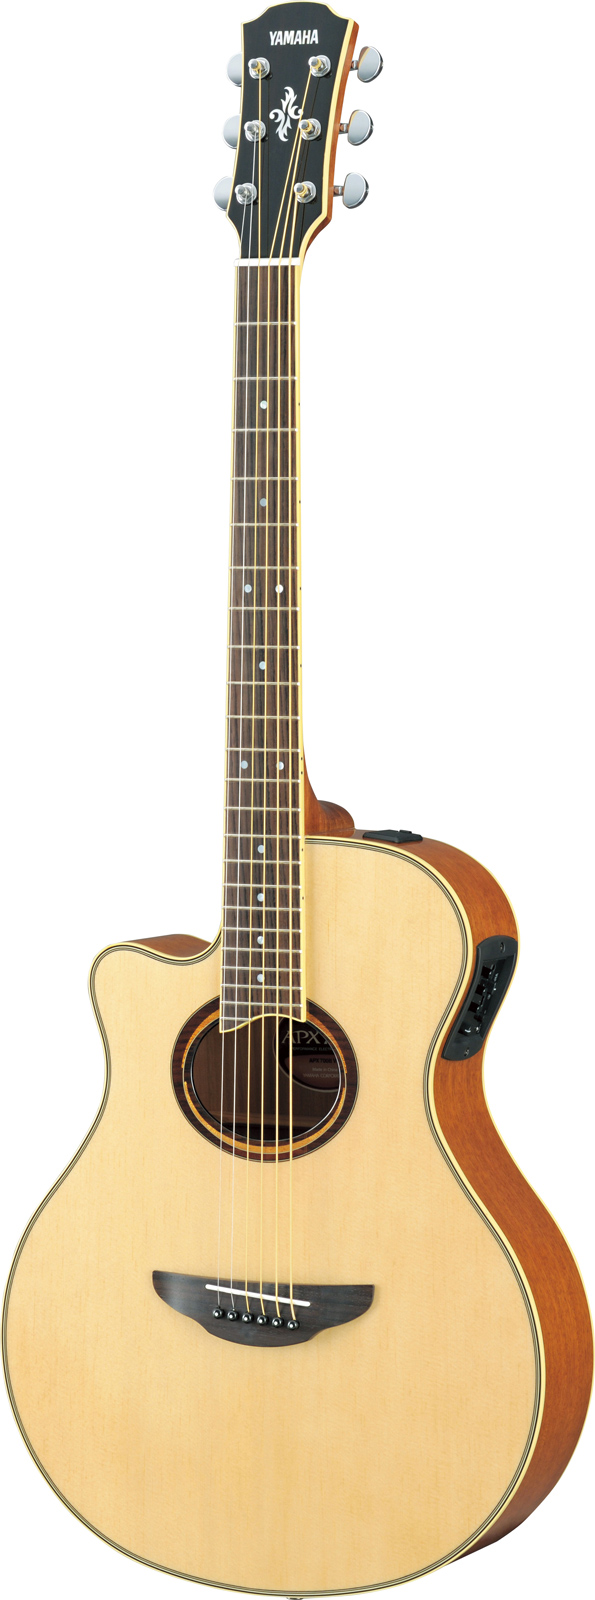 YAMAHA LEFT HANDED APX700IIL NATURAL